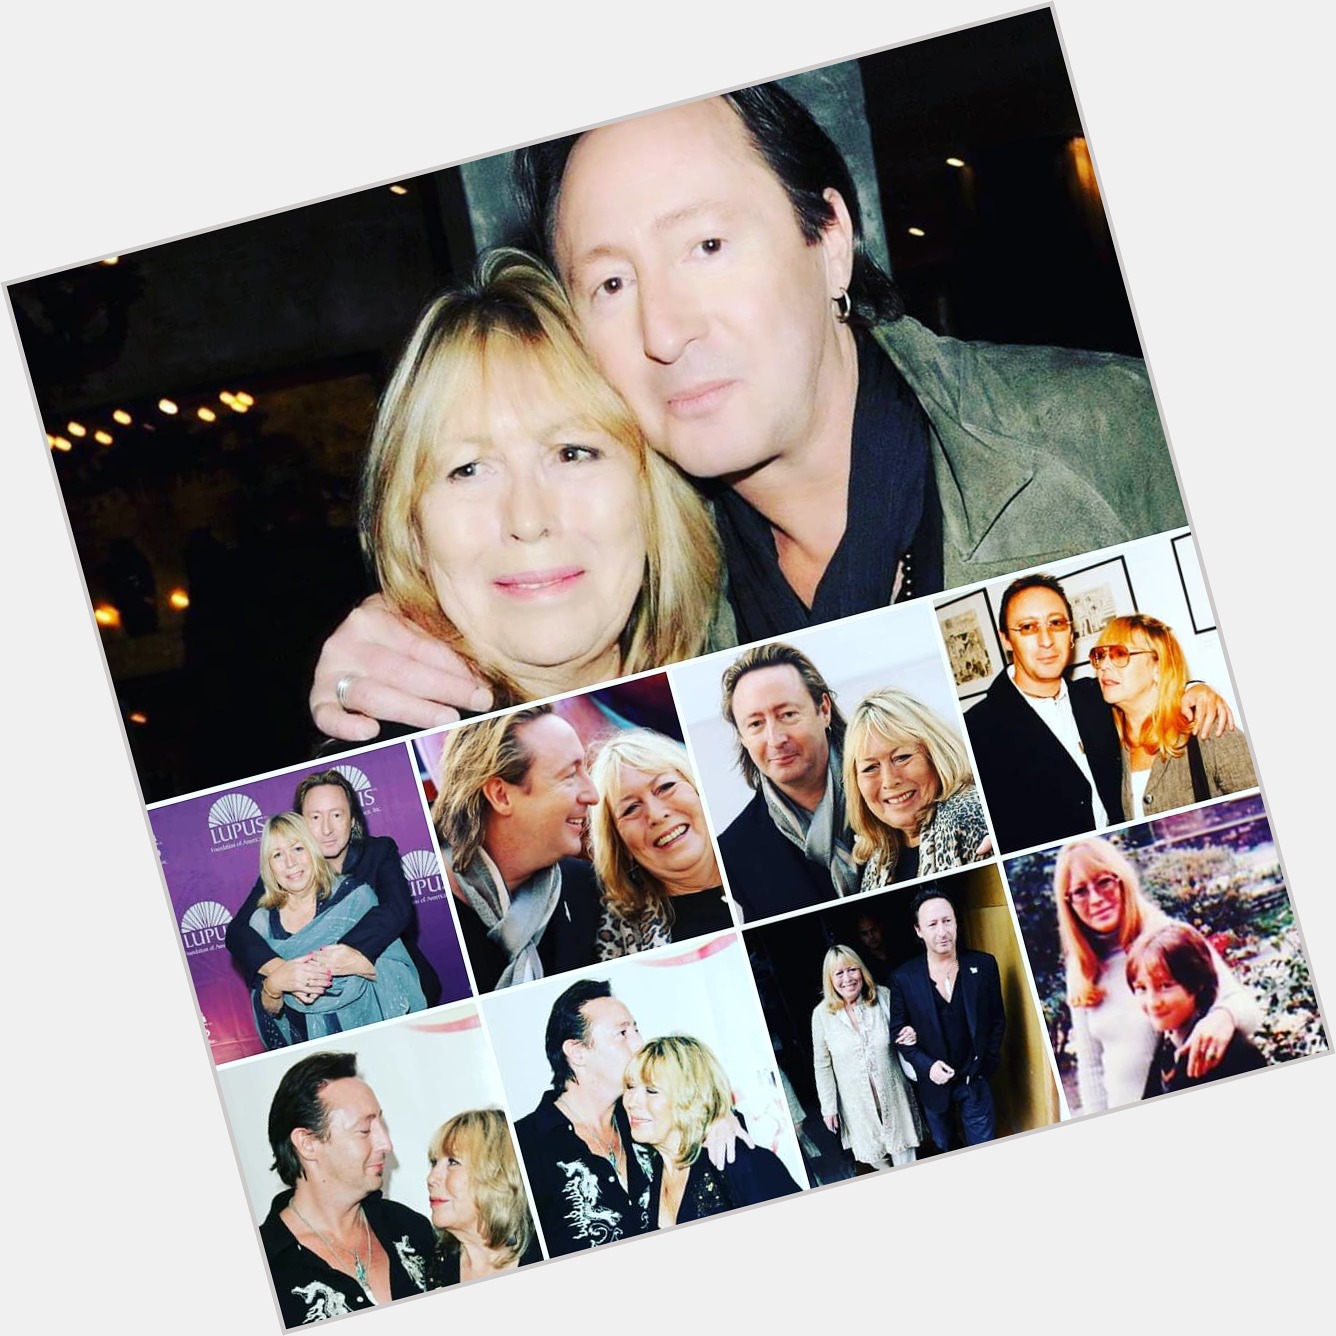 HAPPY BIRTHDAY in heaven Cynthia Lennon !!!! Your very much missed HERE!!!! Most by your son 